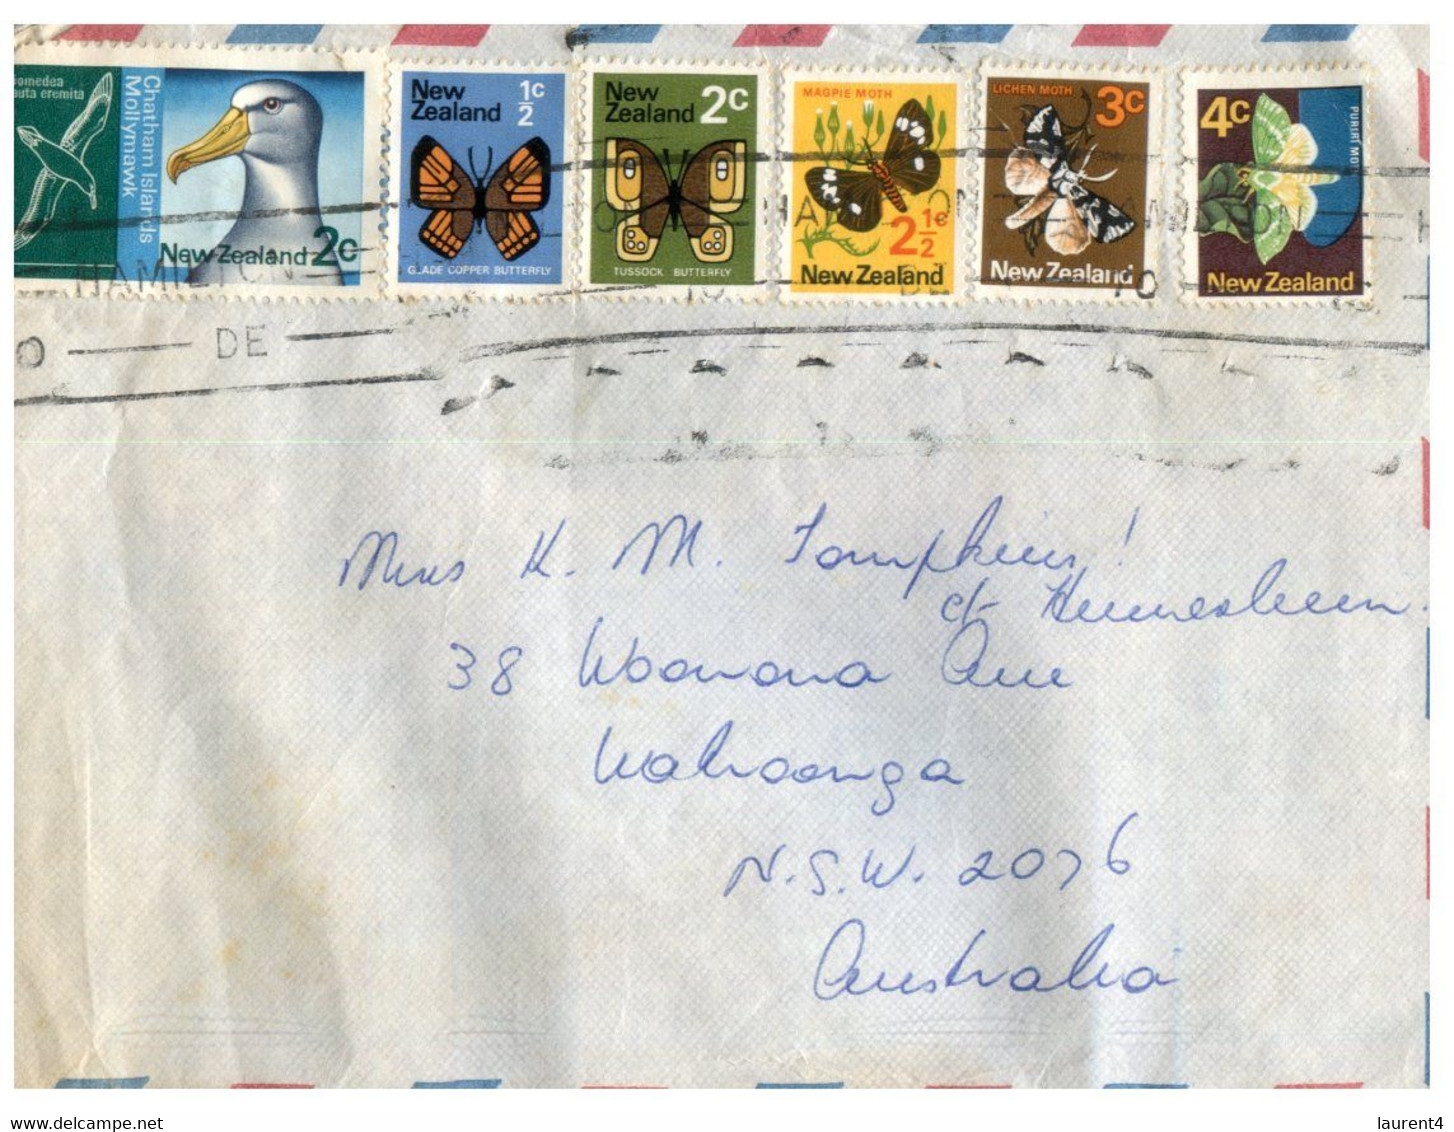 (HH 29) New Zealand FDC Cover Posted To Australia - With Many Butterfly Stamps... (early 1970s ?) - Lettres & Documents